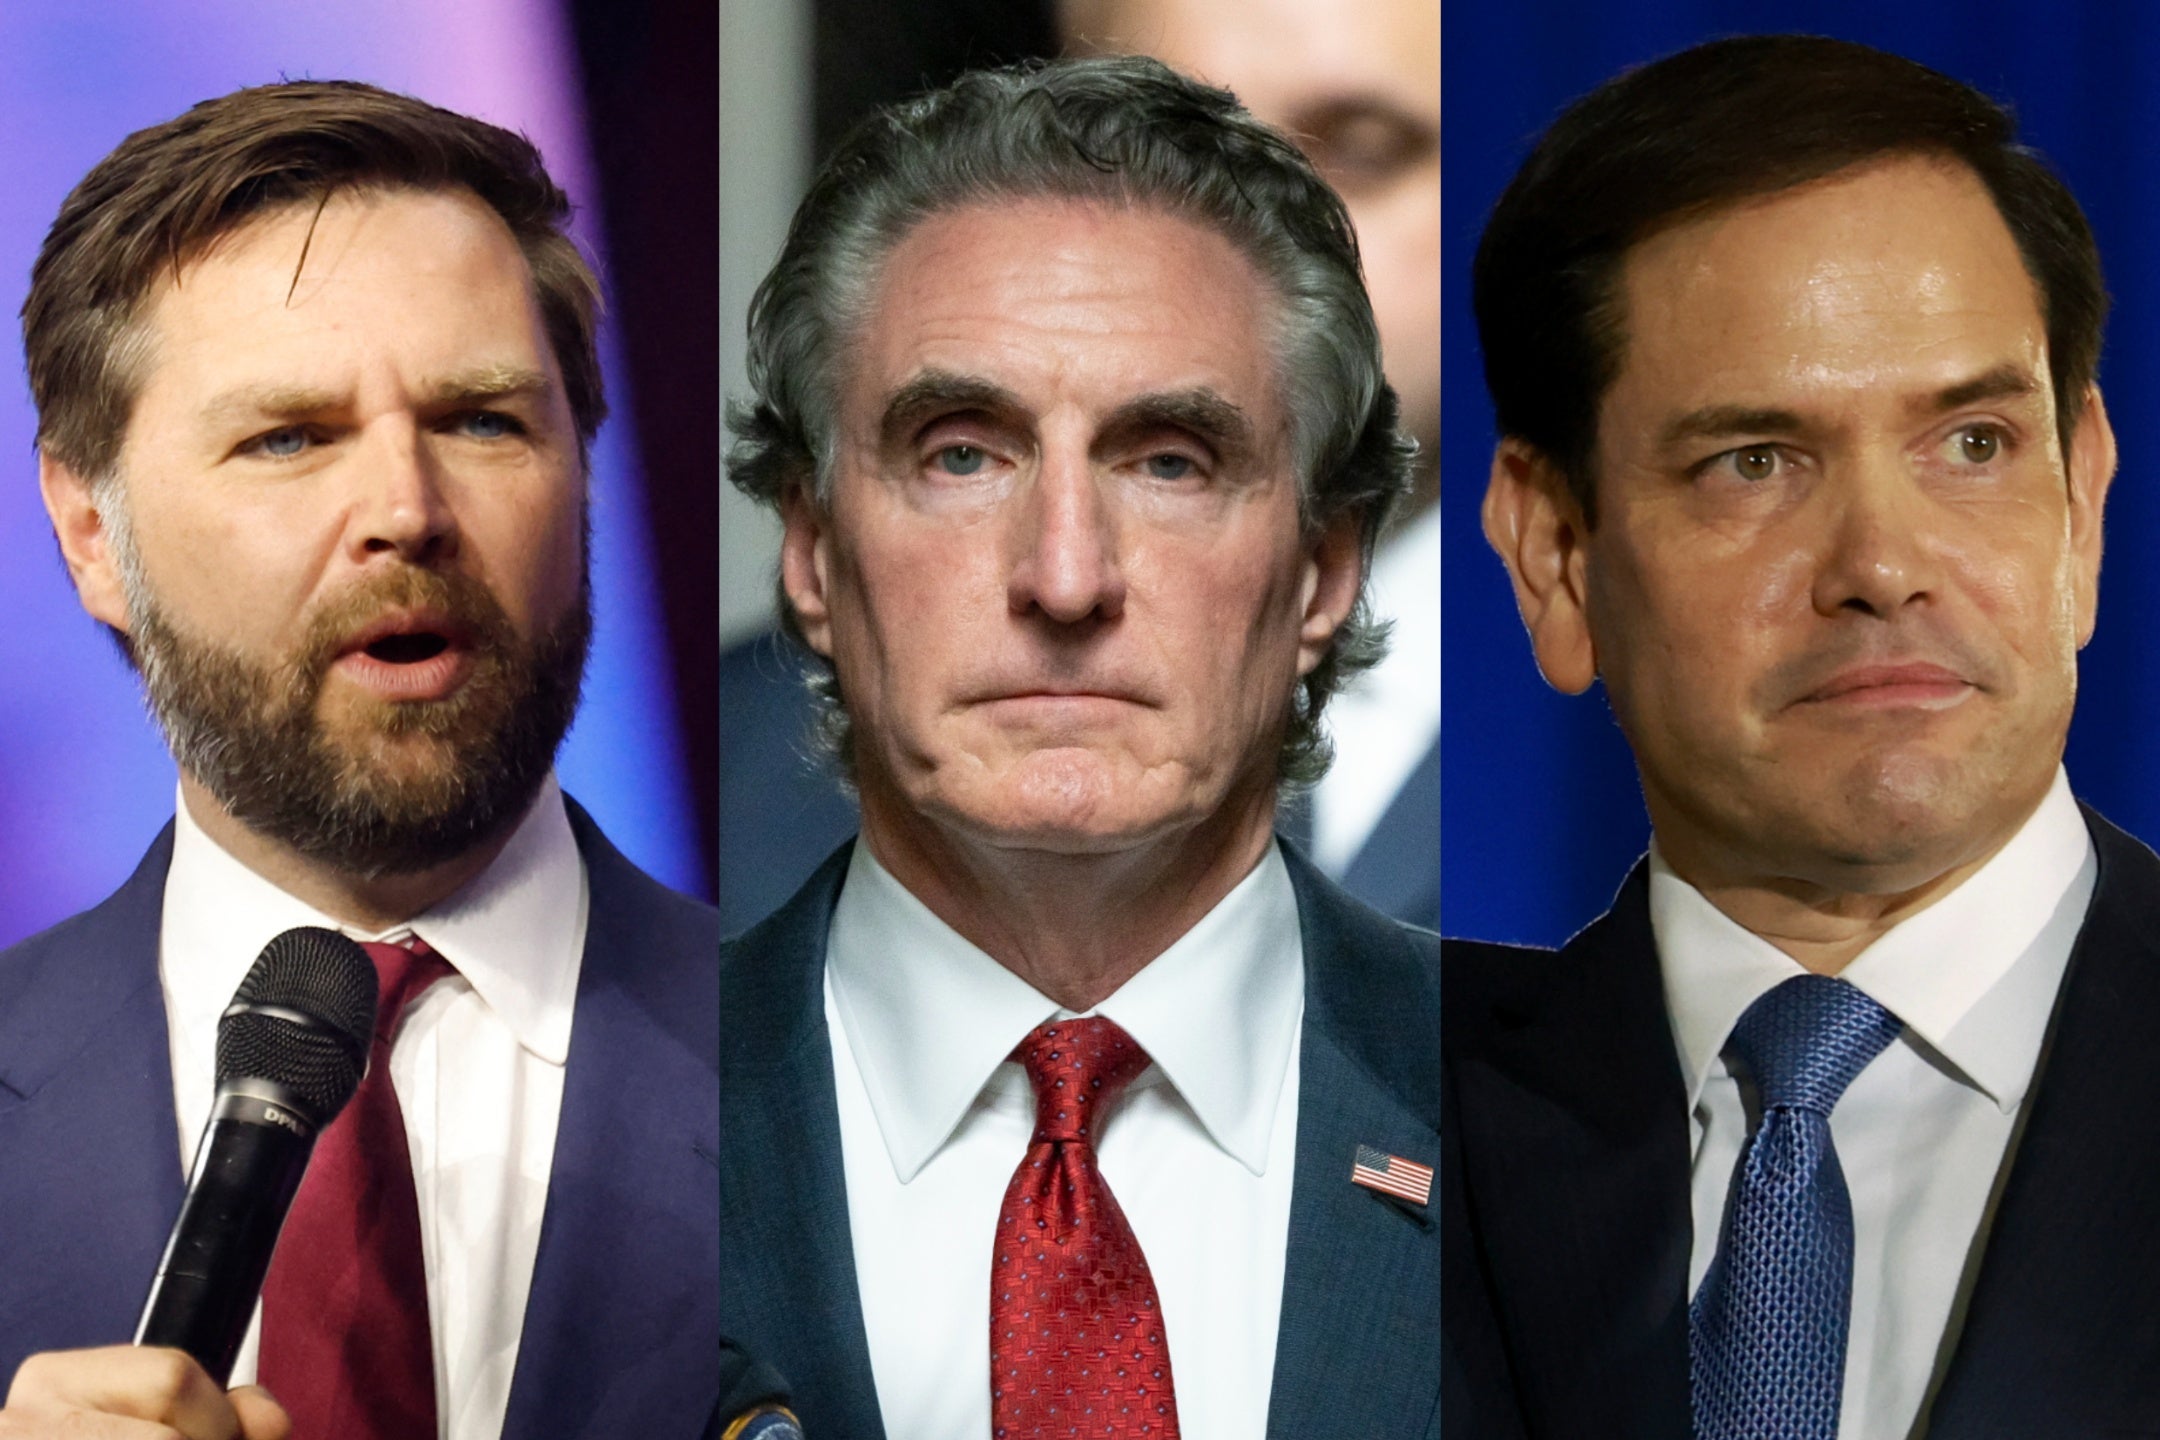 JD Vance, Doug Burgum, and Marco Rubio are all possible contenders to be Trump’s running mate